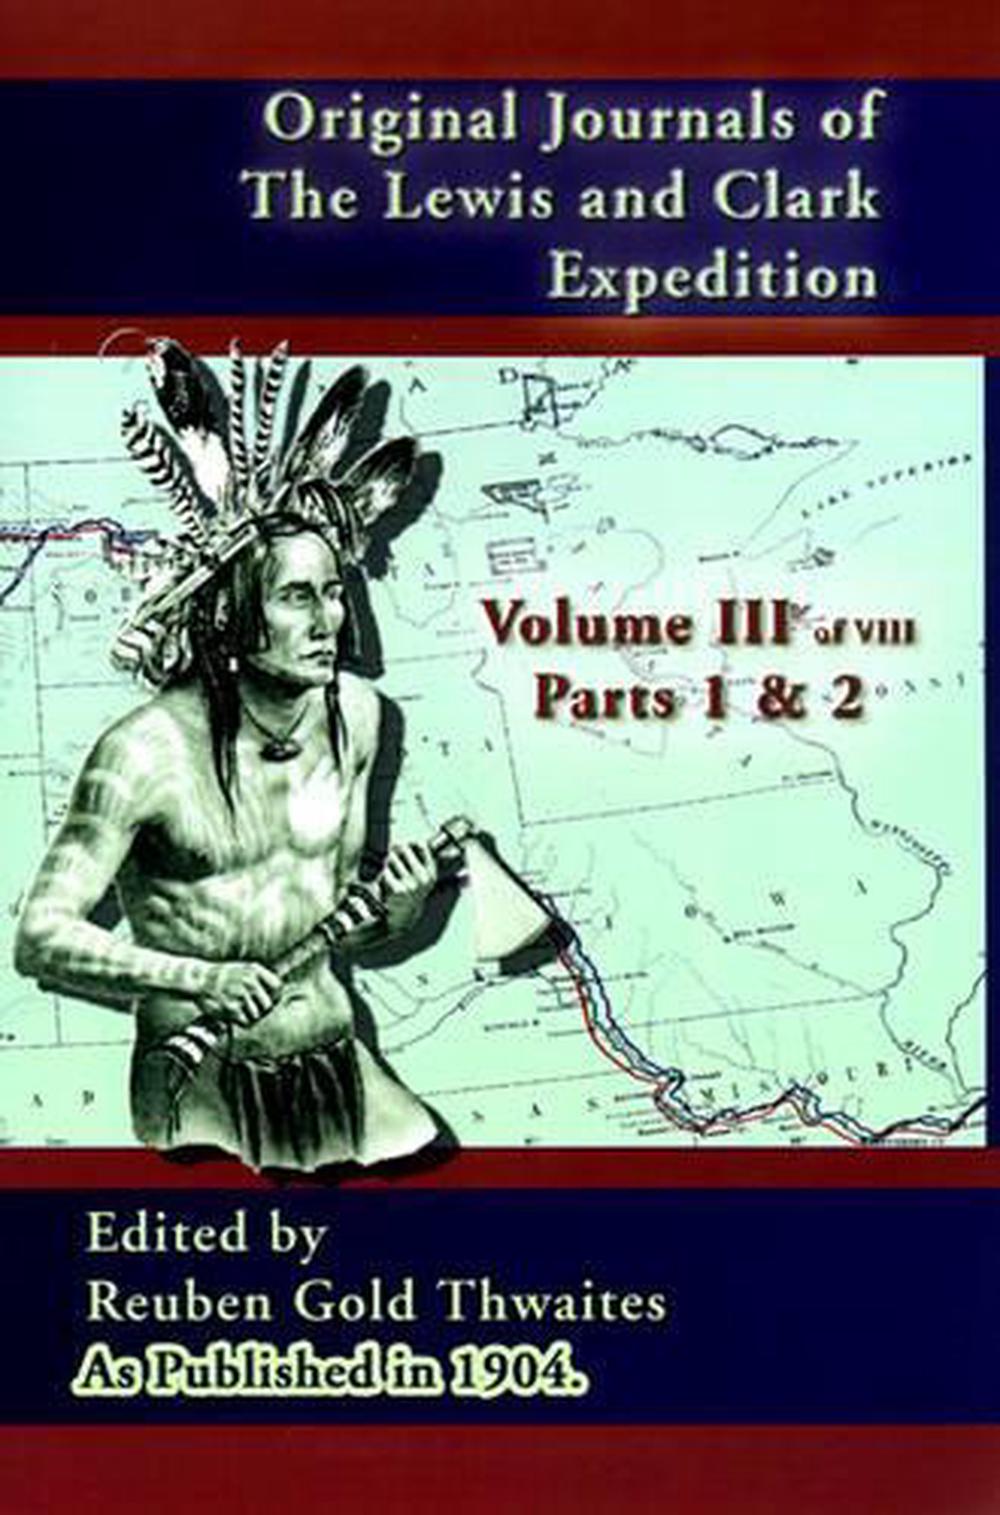 The Journals of the Lewis and Clark Expedition, Volume 5 by Meriwether Lewis